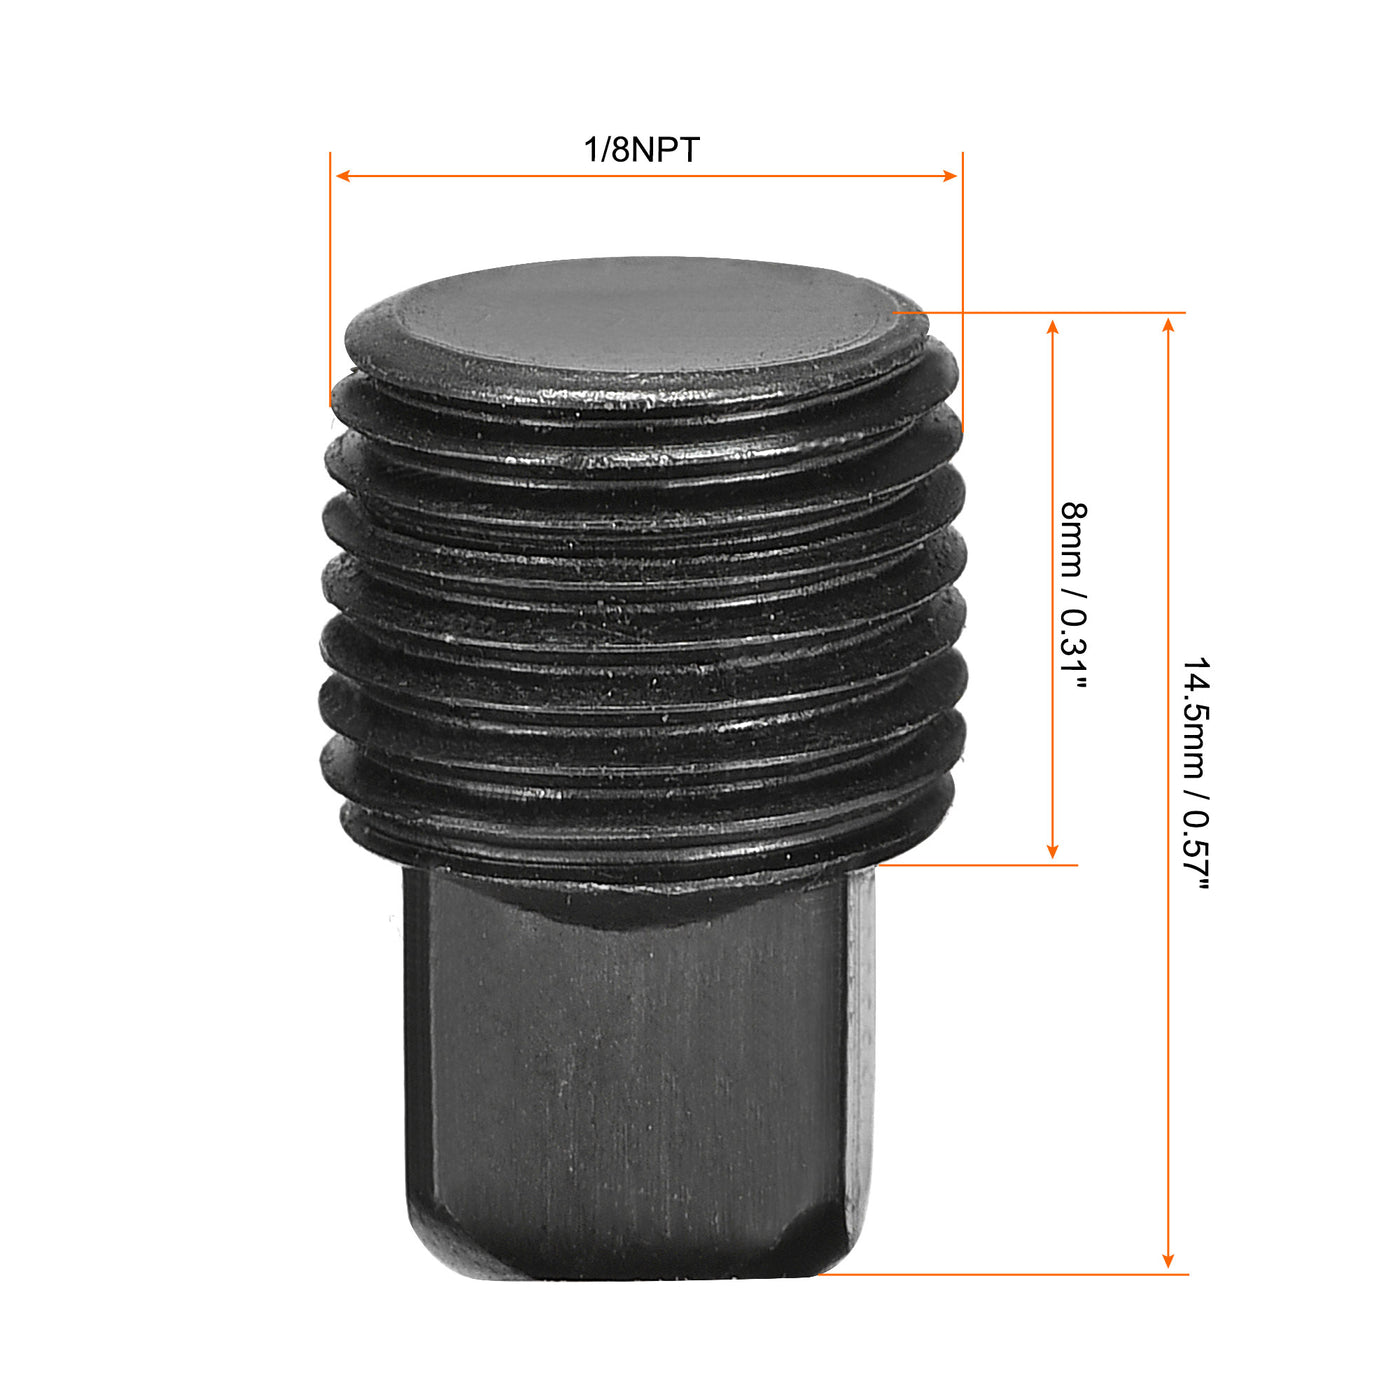 uxcell Uxcell Outer Square Head Socket Pipe Fitting Plug 1/8NPT Male Thread Carbon Steel 4Pcs for Terminate Pipe Ends